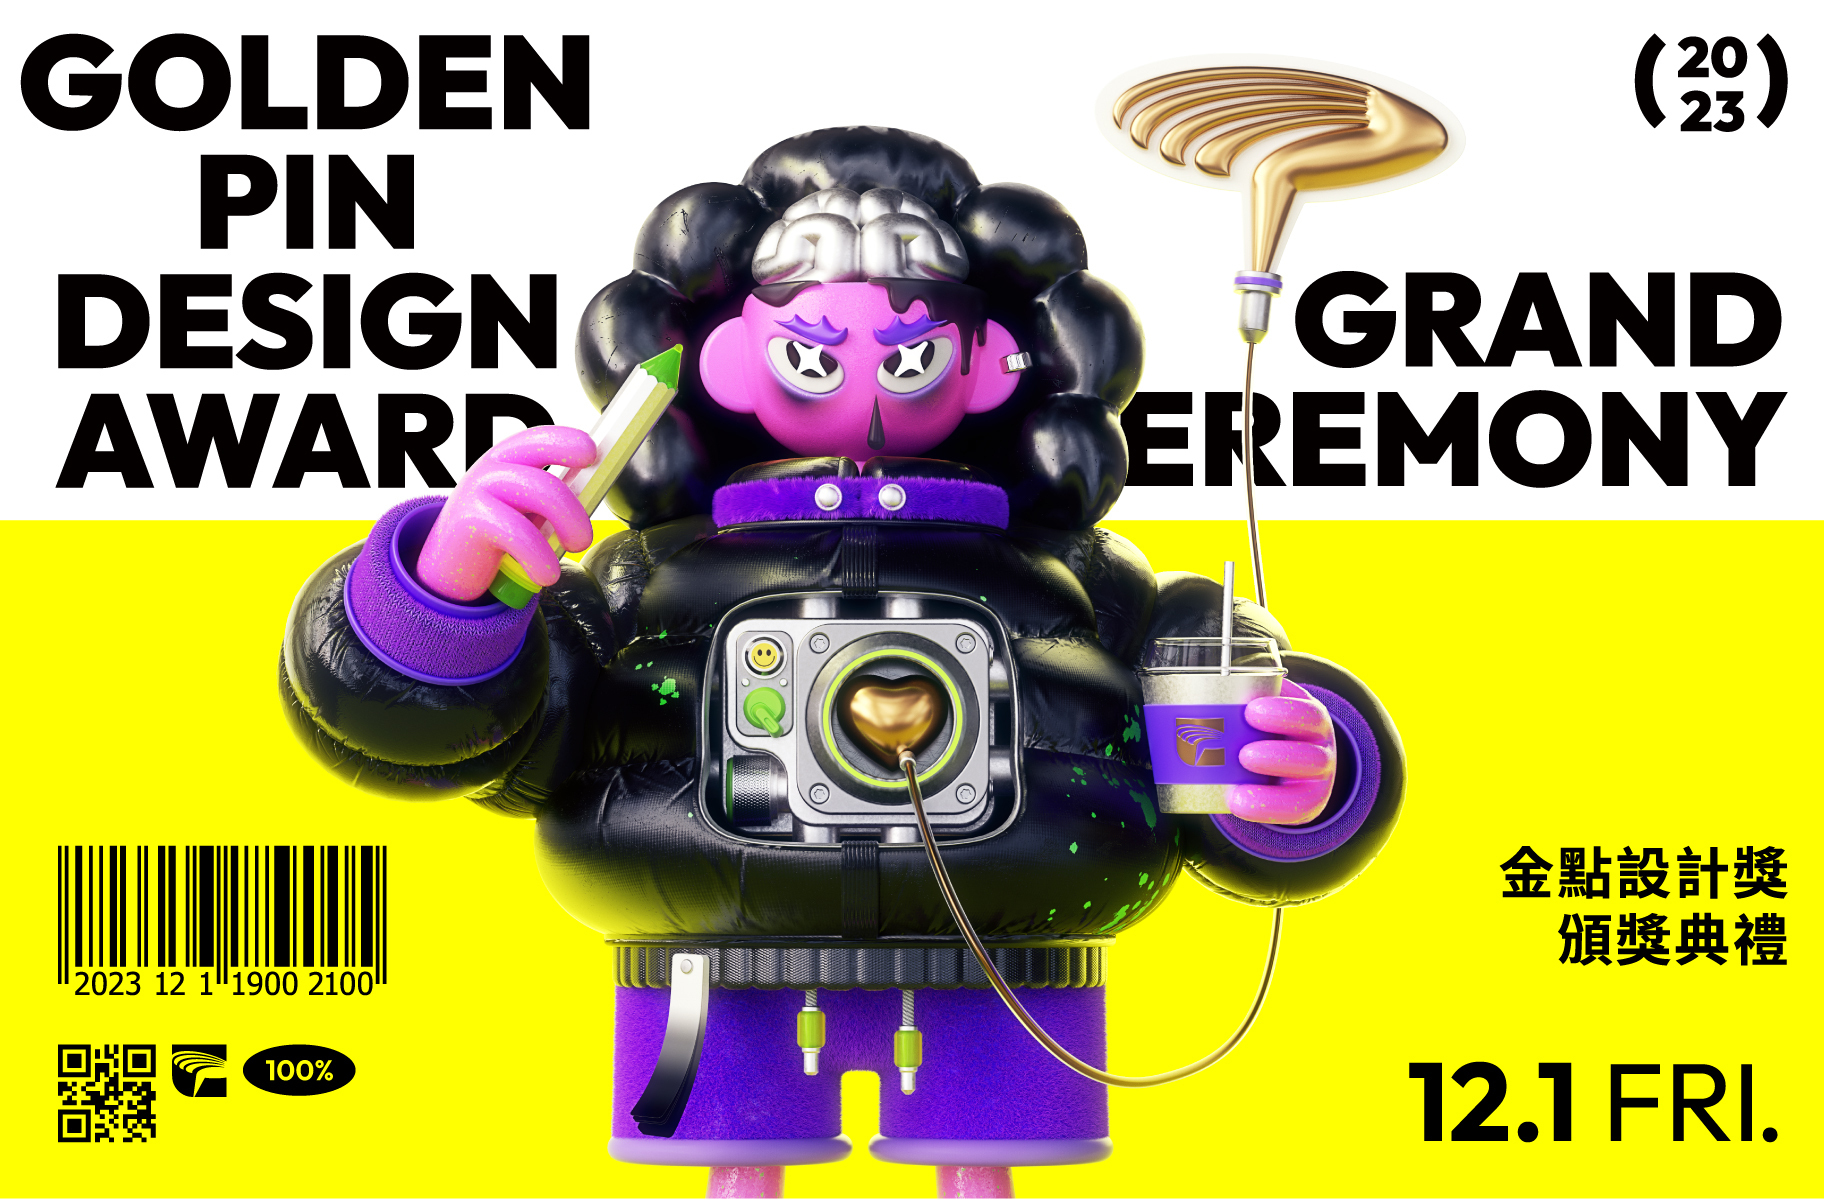 2023 Golden Pin Design Awards Ceremony: Key Visual Unveiled! Ace Producer Isaac Chen Returns with A Virtual Character on the “Superload” of Design